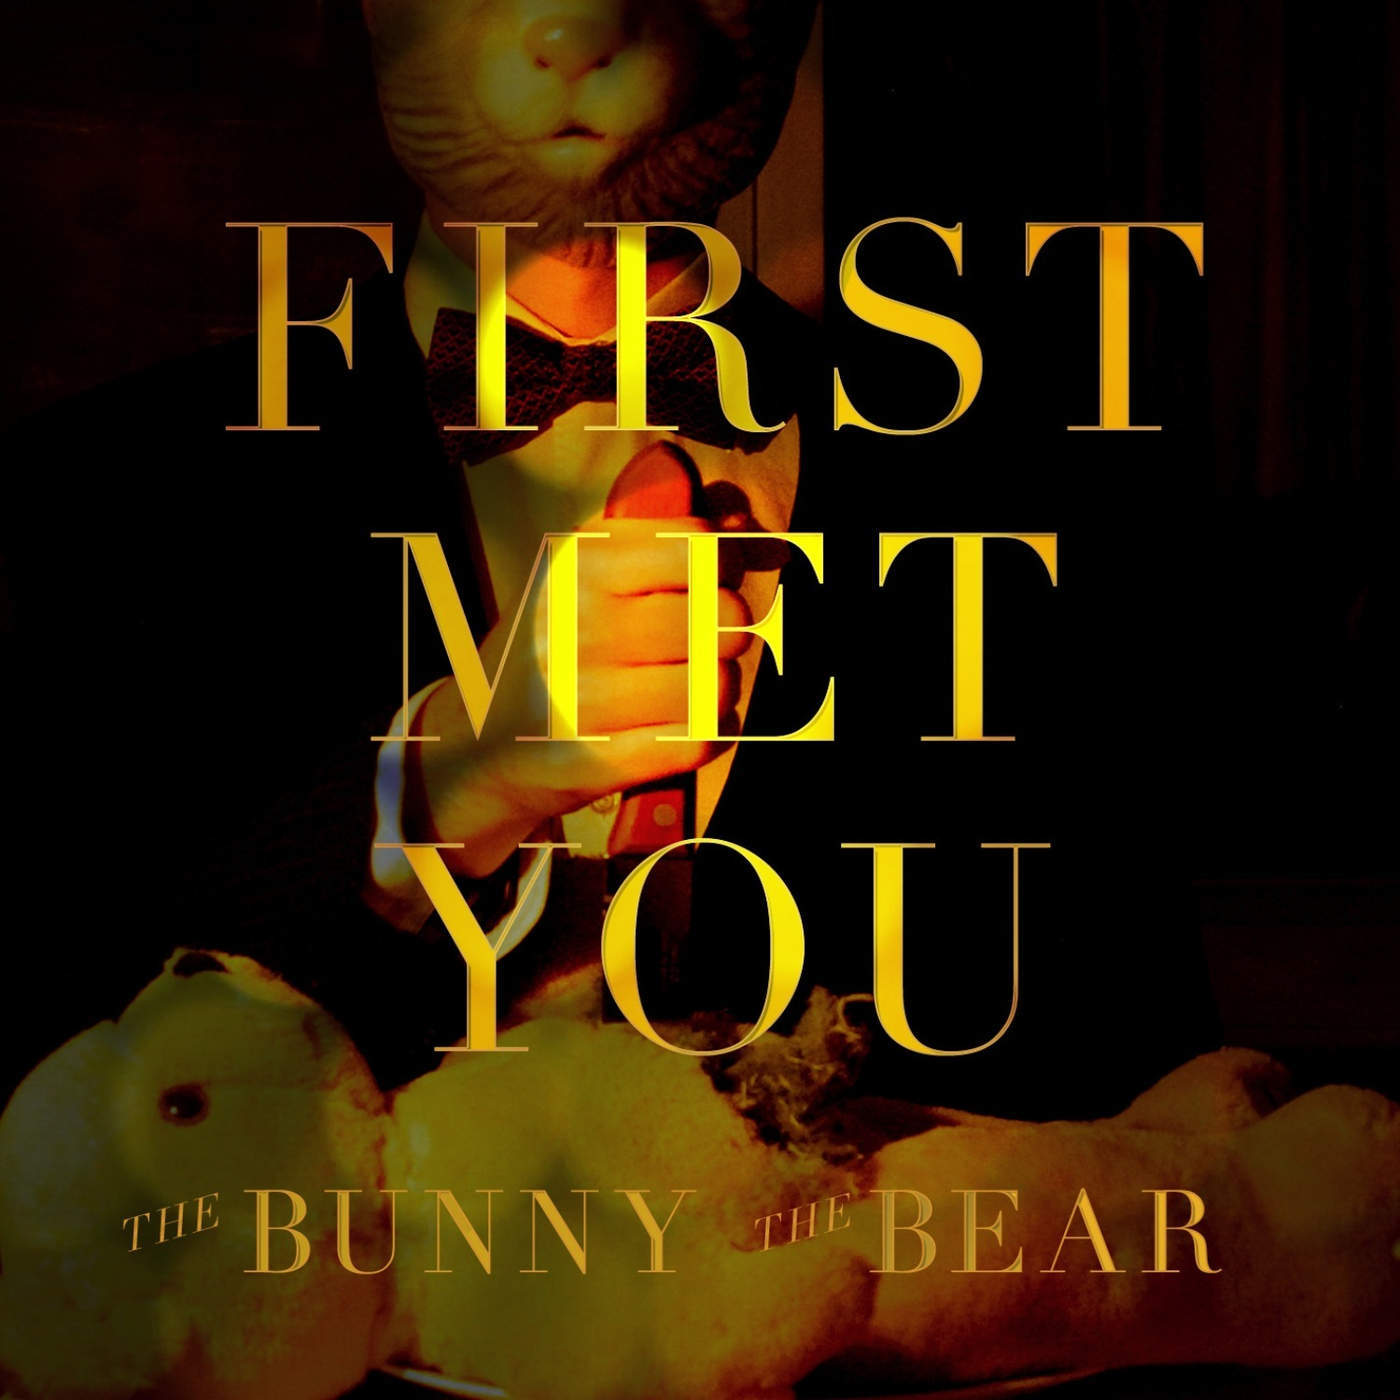 THE BUNNY THE BEAR - First Met You cover 